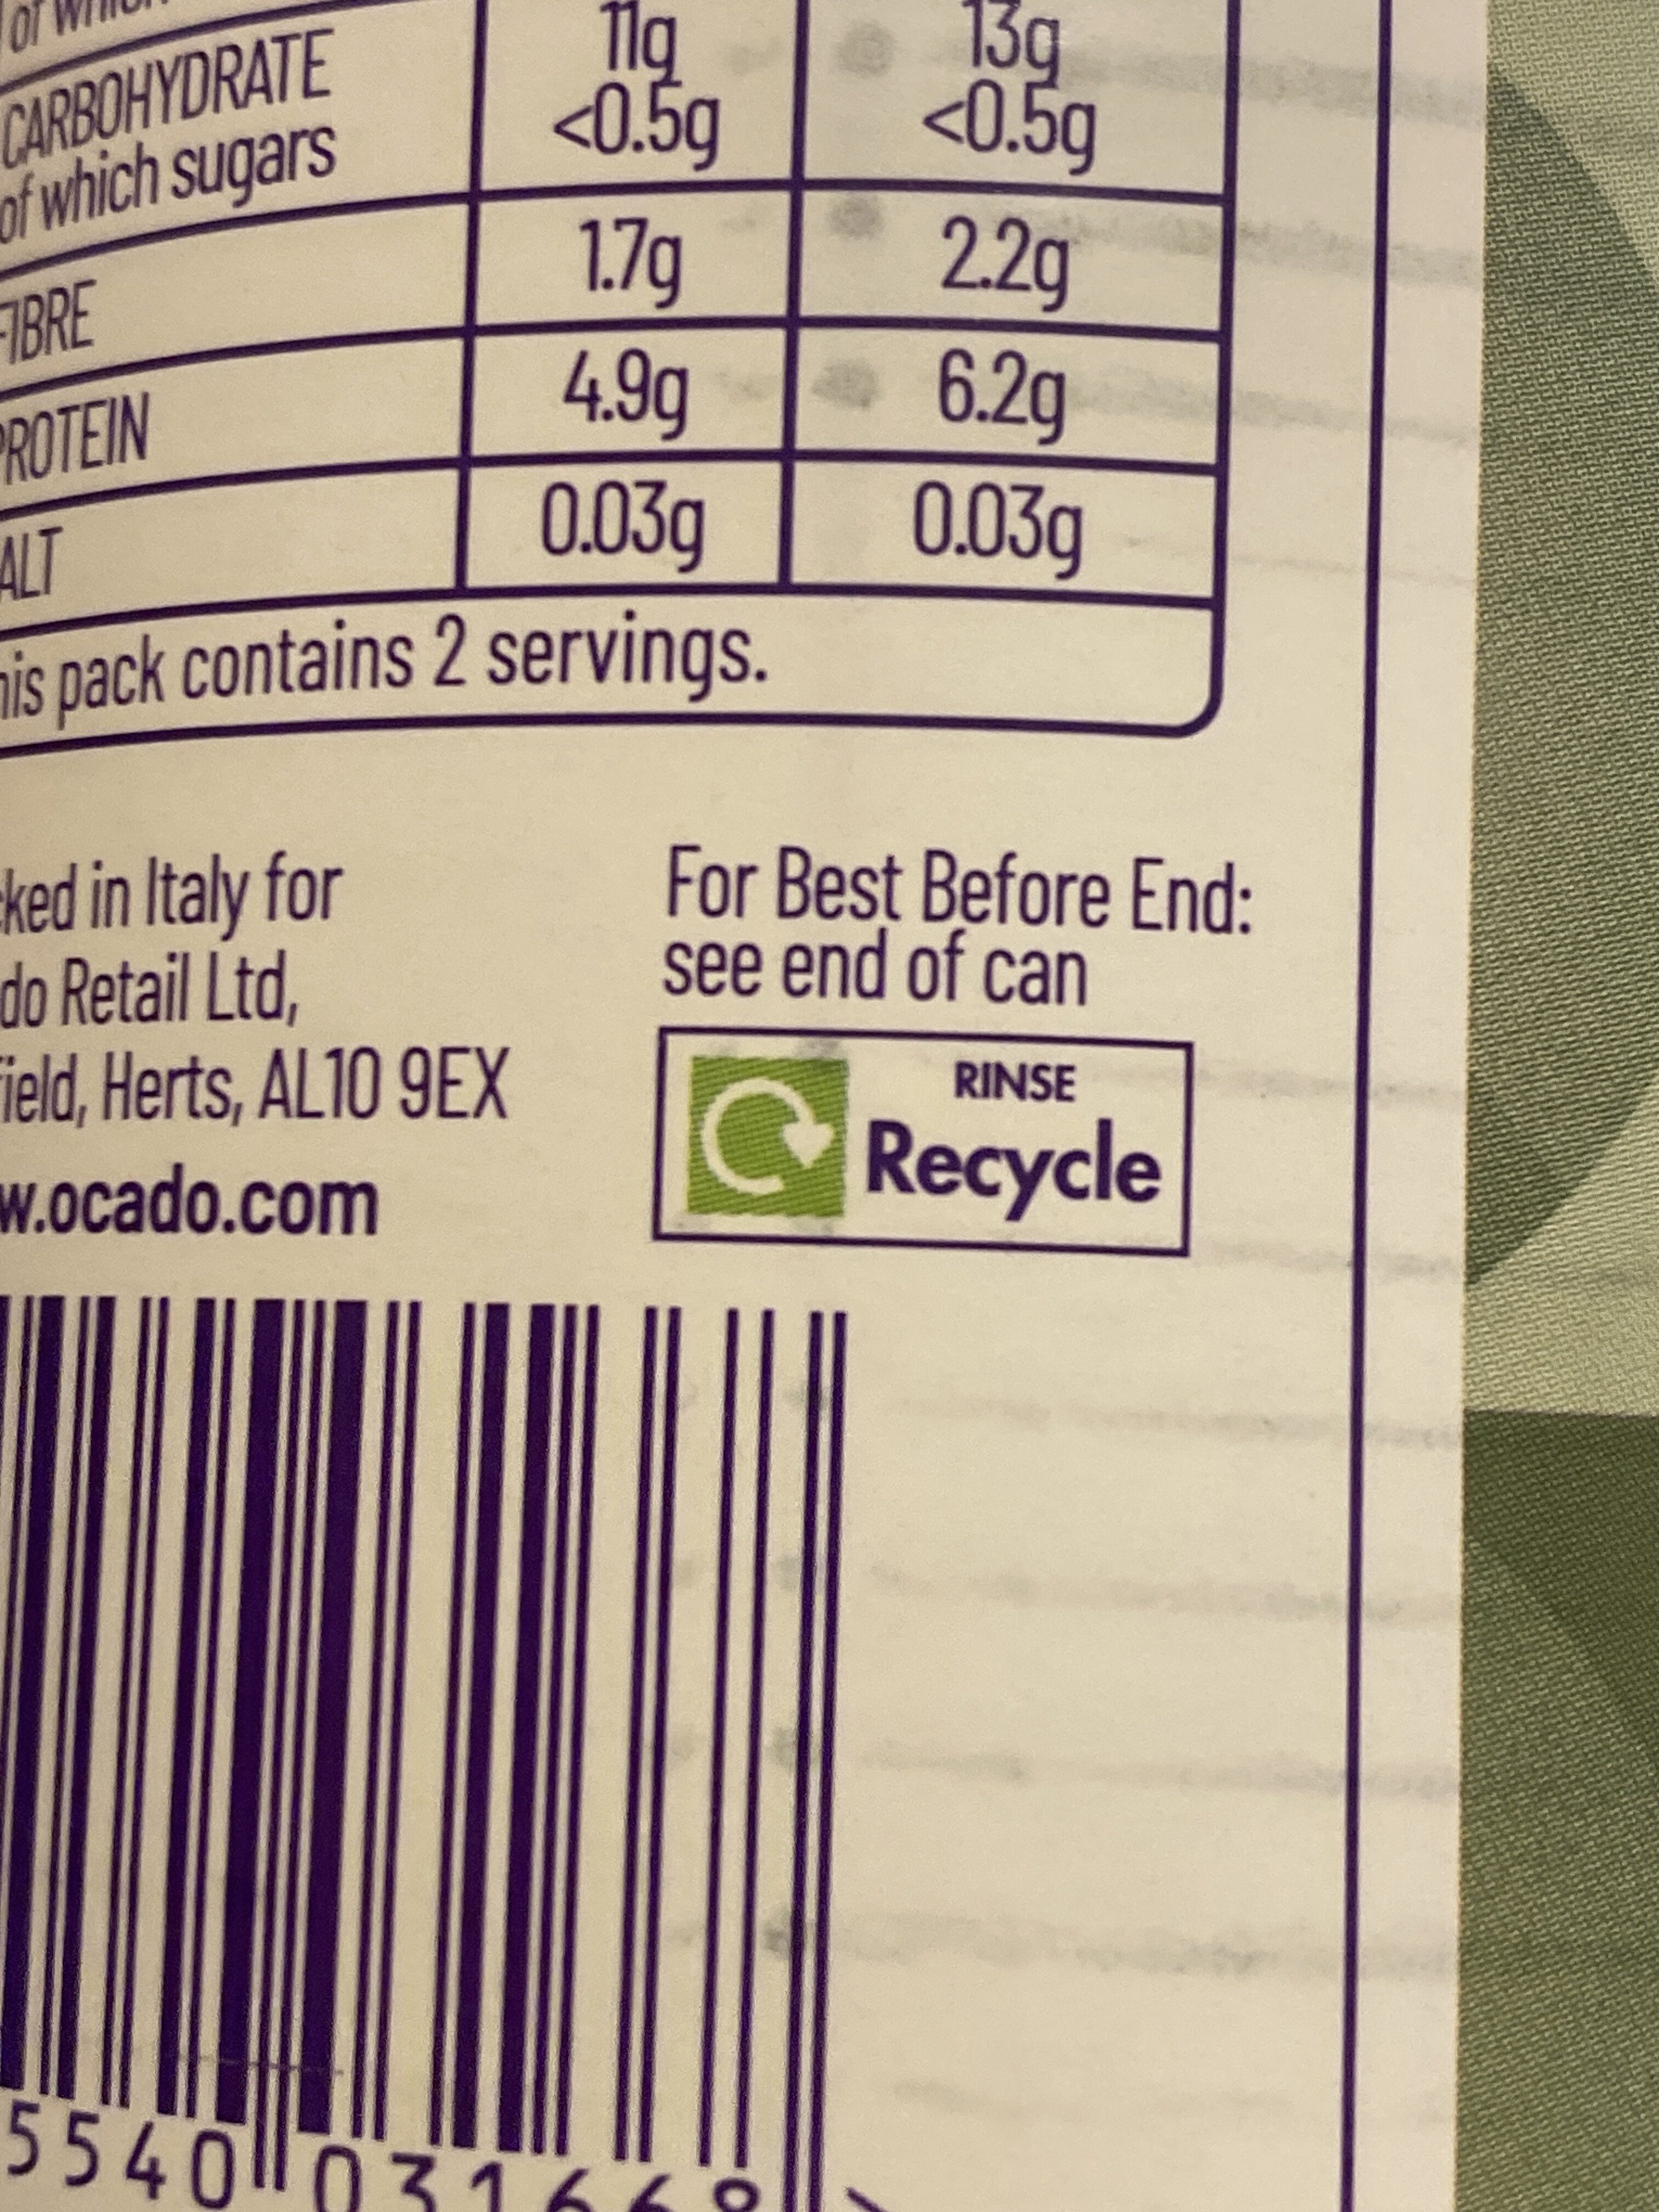 Green Lentils - Recycling instructions and/or packaging information